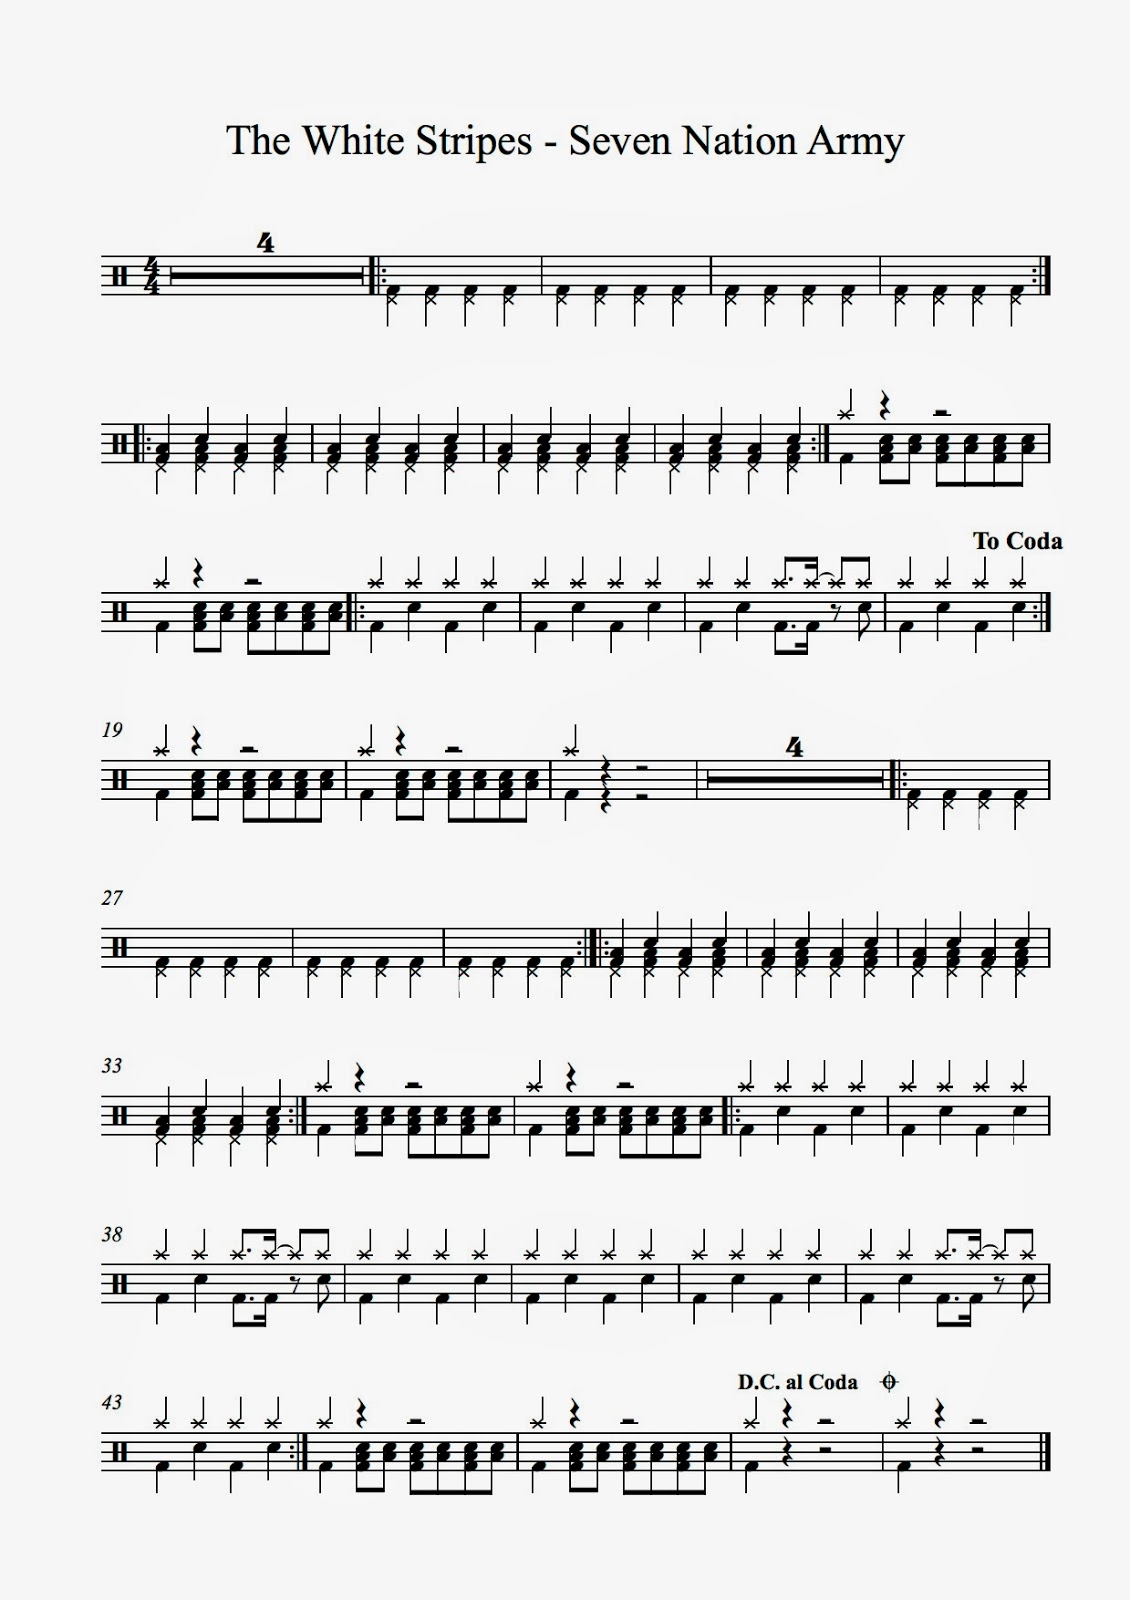 Academy Drums Score For The White Stripes Seven Nation Army